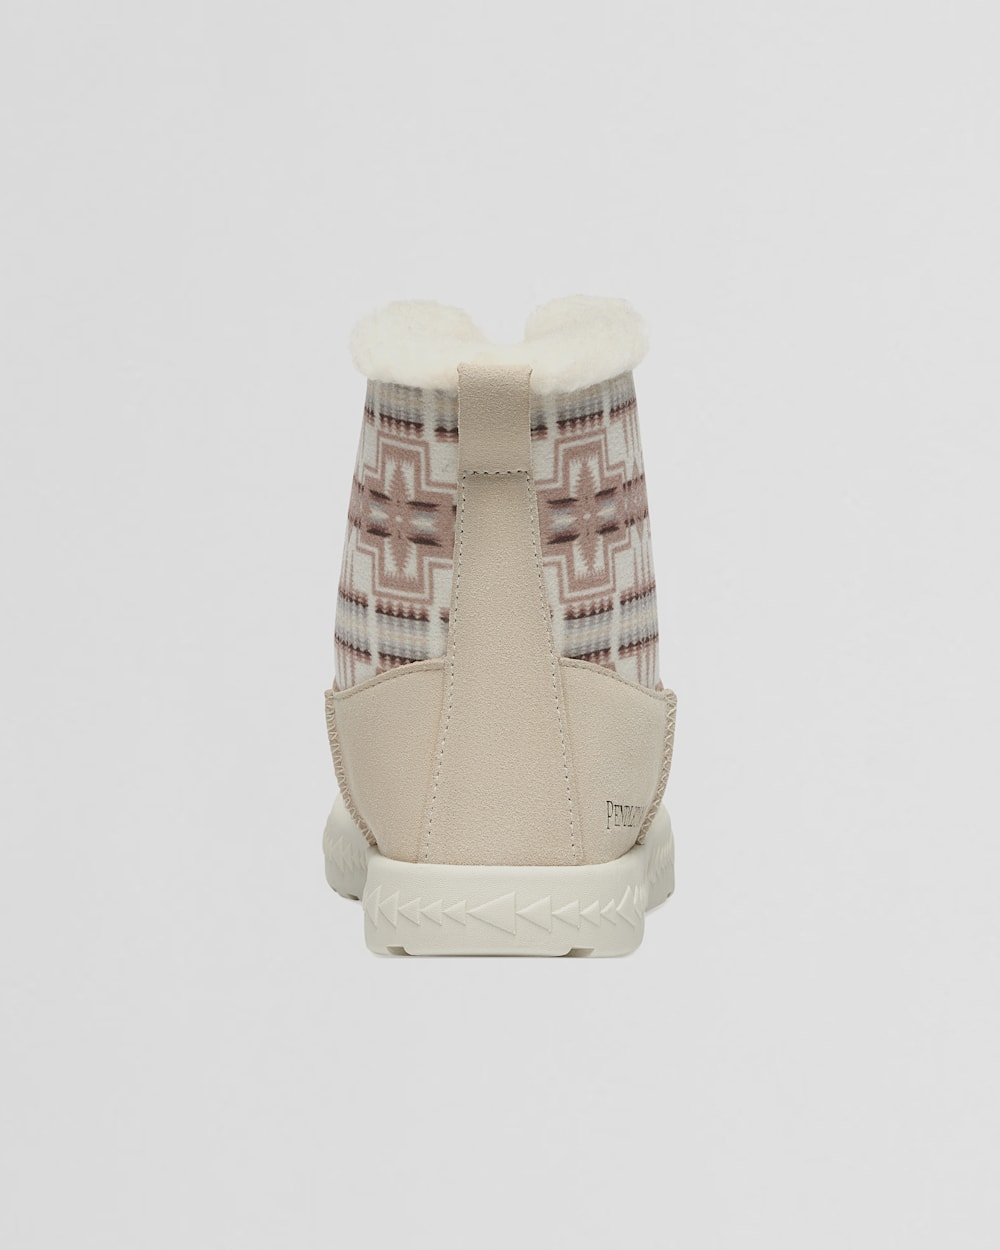 ALTERNATE VIEW OF WOMEN'S CABIN FOLD-DOWN SLIPPERS IN ANTIQUE WHITE image number 4